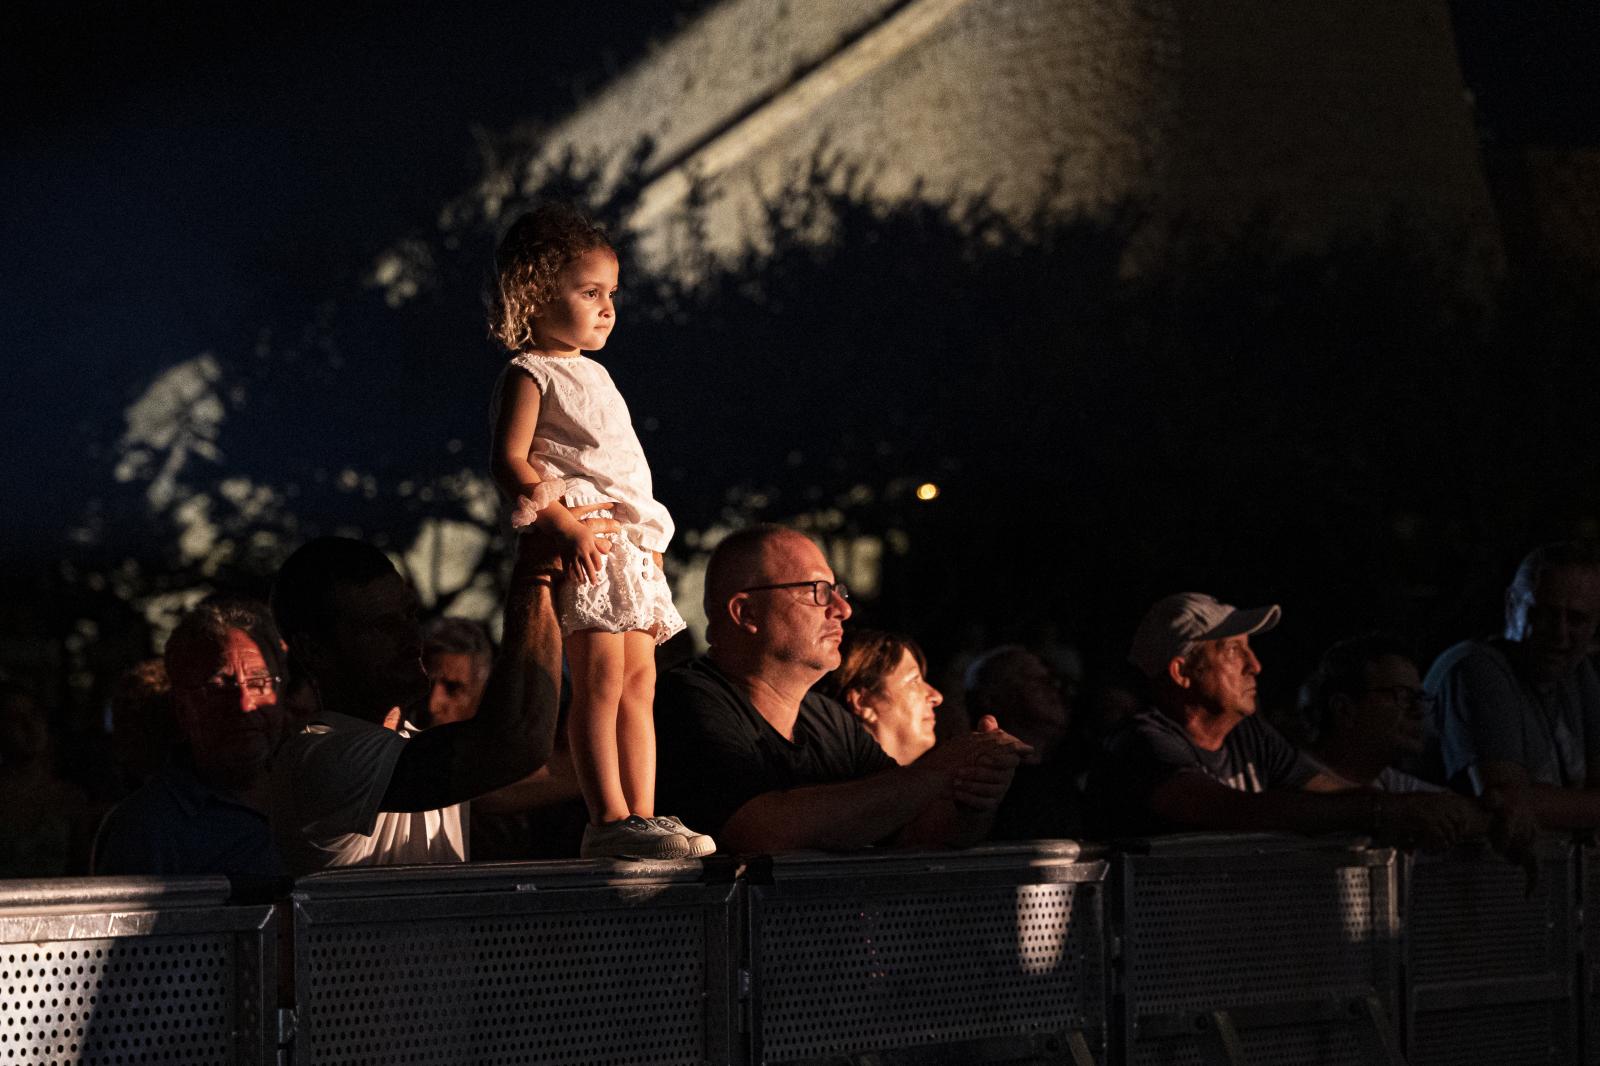 Daily News - A little girl is watching Los Rebeldes' concert...